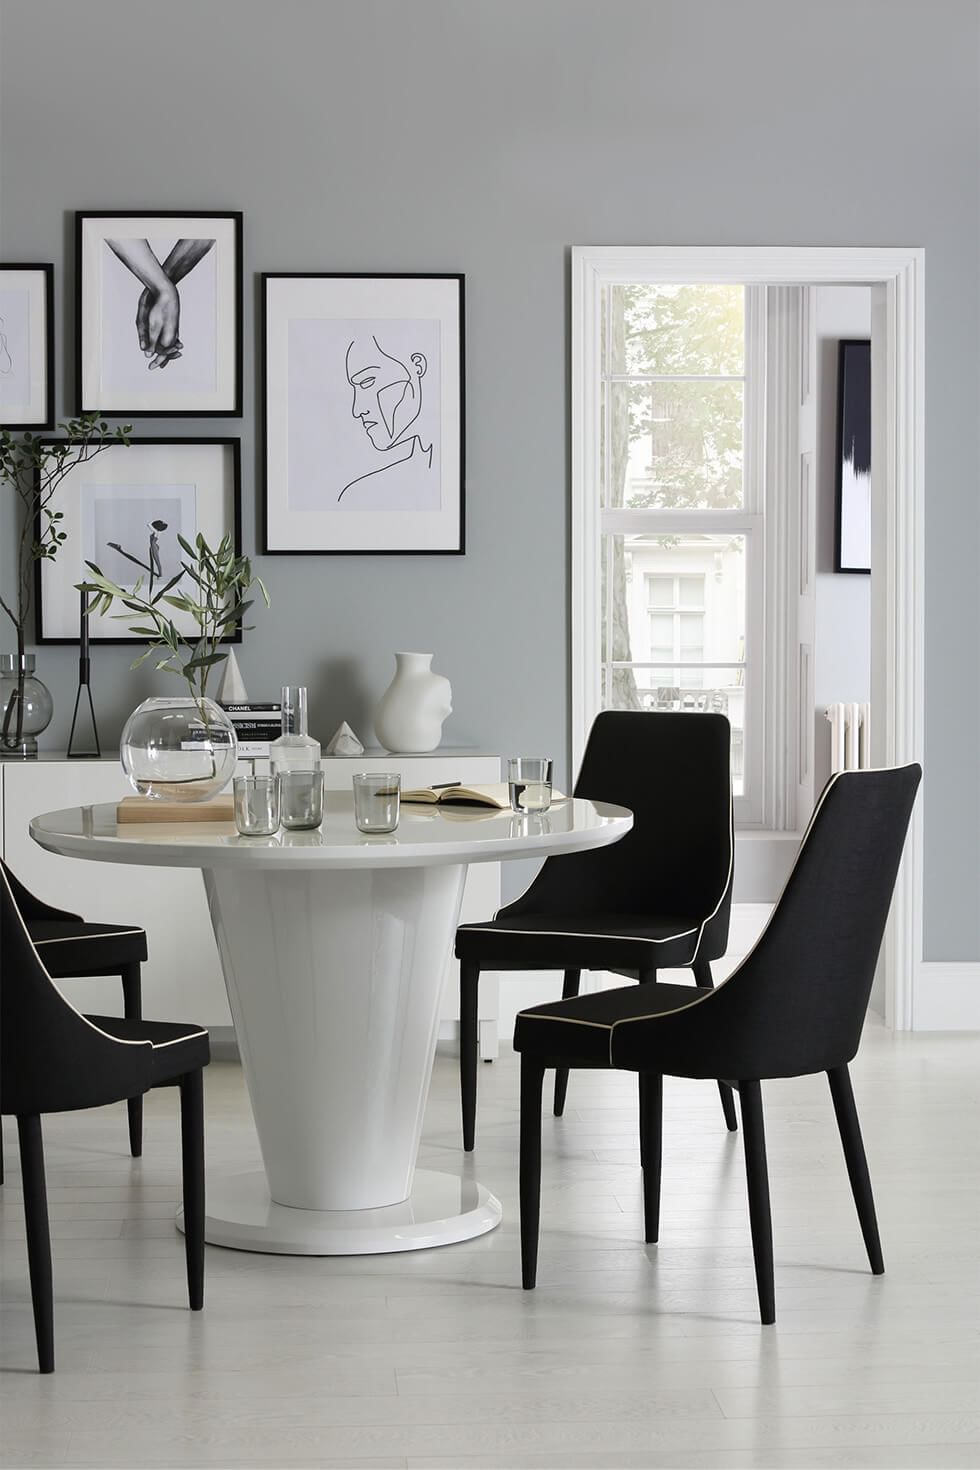 Sophisticated black and white dining set in a dining room with a gallery wall